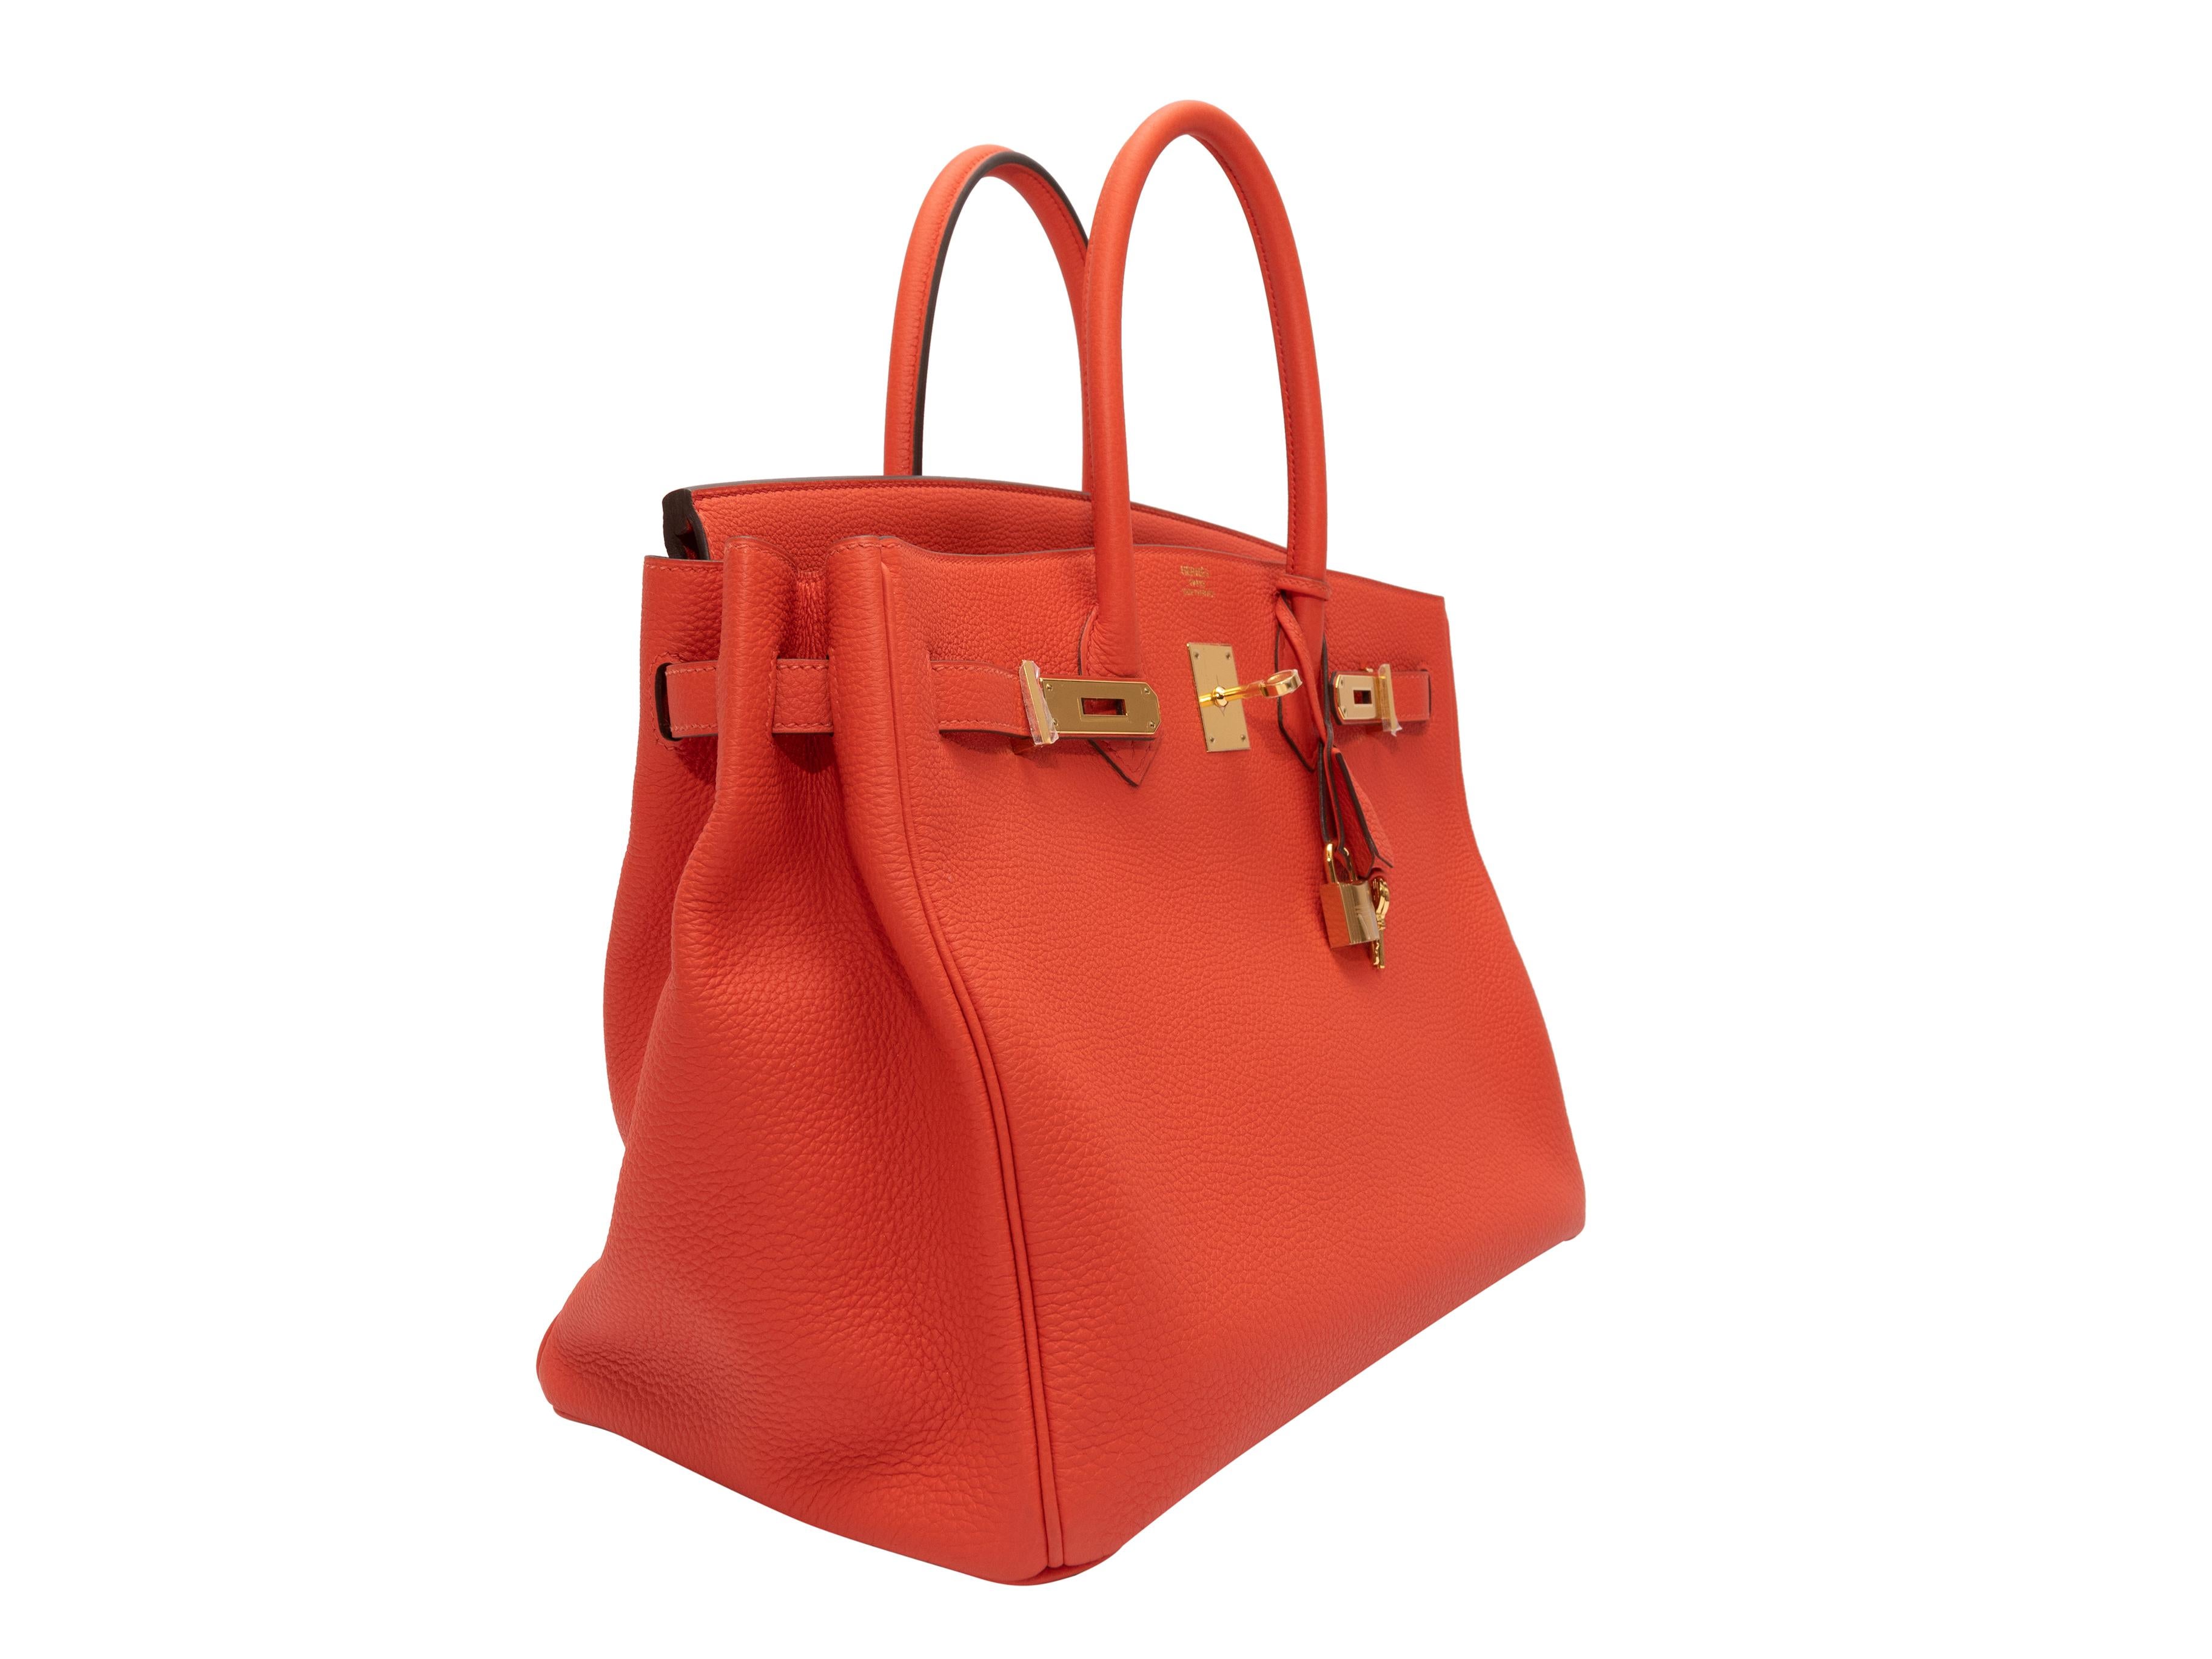 Product Details: Capucine Hermes Togo 35 Birkin Bag. The Togo 35 Birkin bag tote features a leather body, gold-tone hardware, dual rolled top handles, and a front lock closure. 13